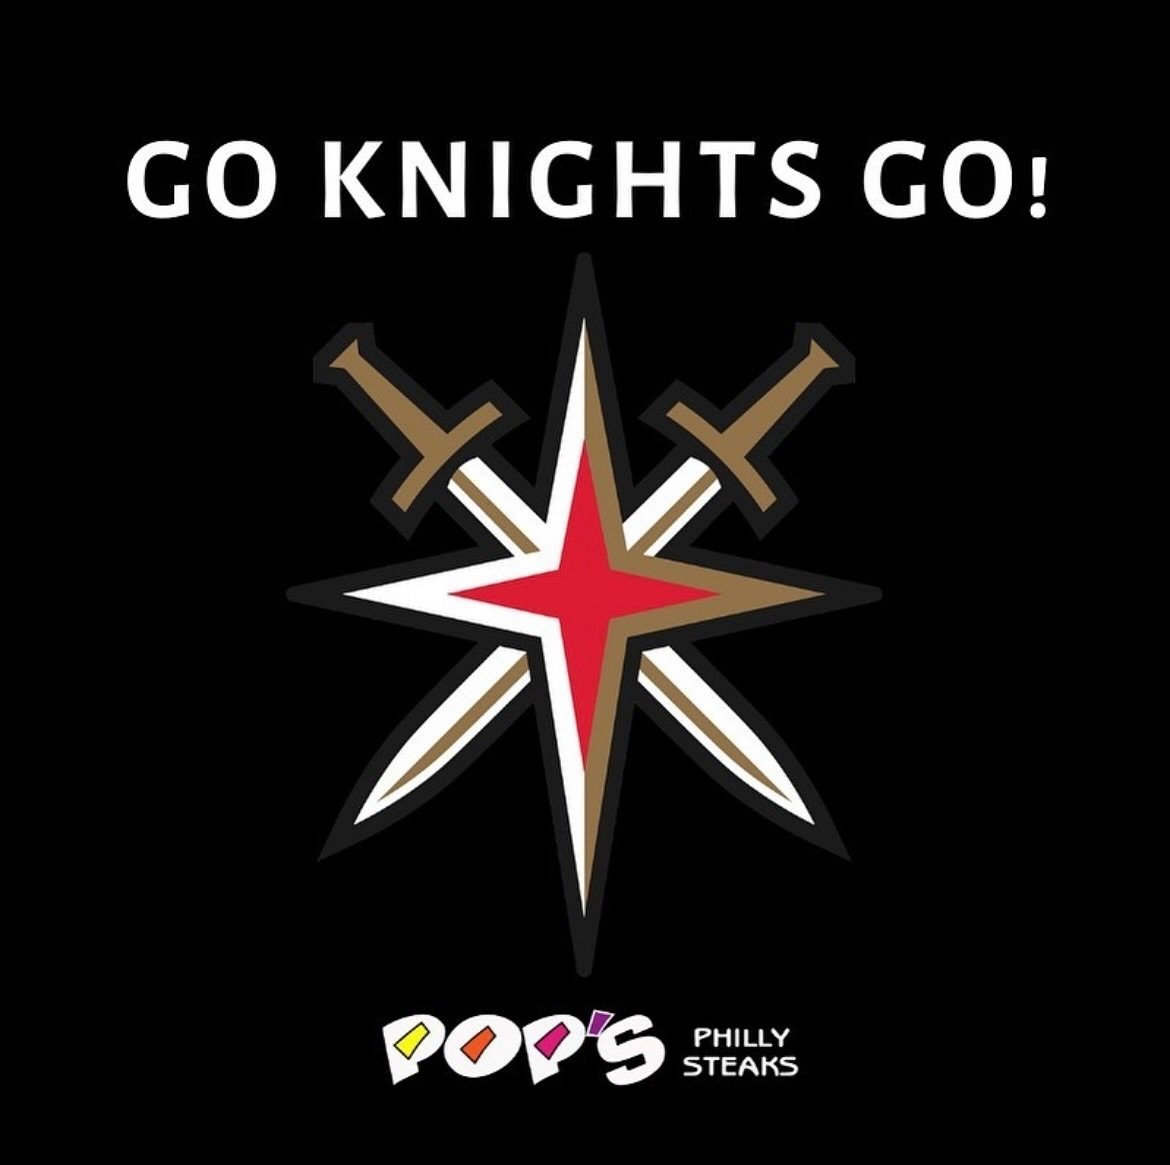 ⚔️ Winning vibes to our Golden Knights during tonight&rsquo;s playoff game! Stop by POP&rsquo;S wearing your VGK gear to score a FREE order of fries with your purchase of a sandwich. Offer valid until midnight. #goknightsgo